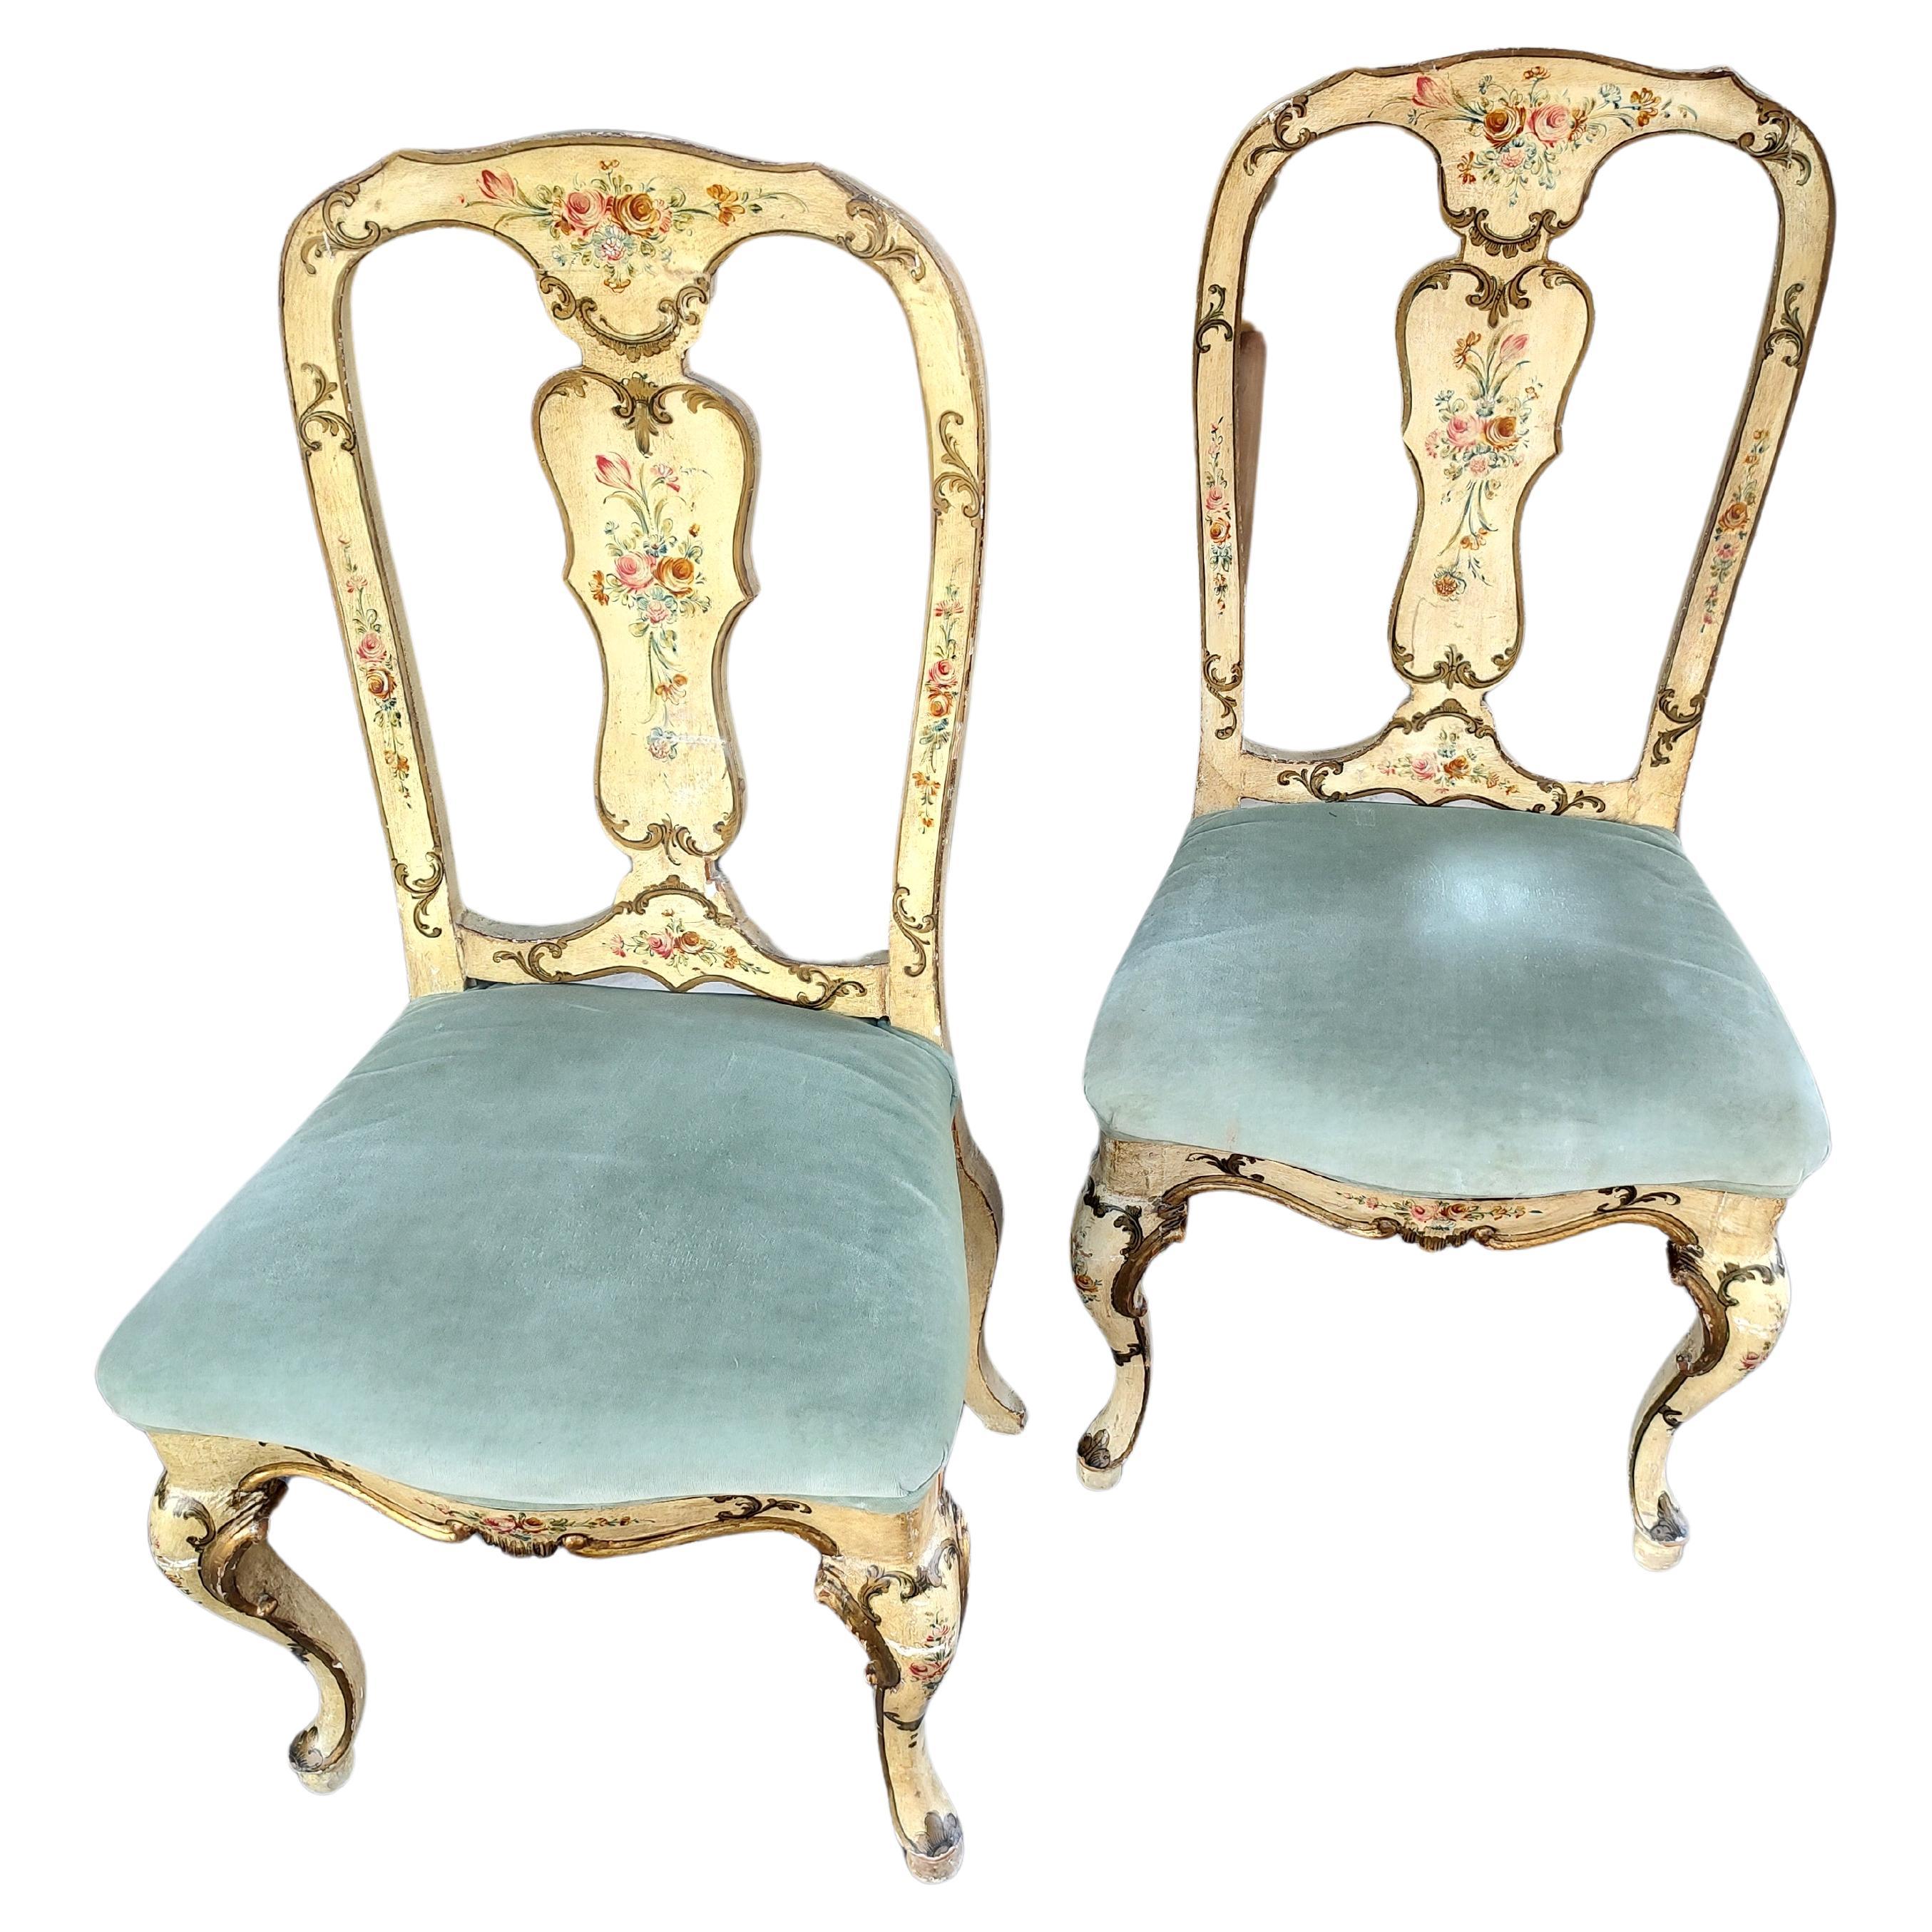 Fabulous pair of hand crafted and hand painted c1940 Venetian side chairs. Upholstered seats along with the aged painting gives a very warm look. Comfy also. Splat backs and cabriolet legs give them Great style.  Great for an entryway. In excellent